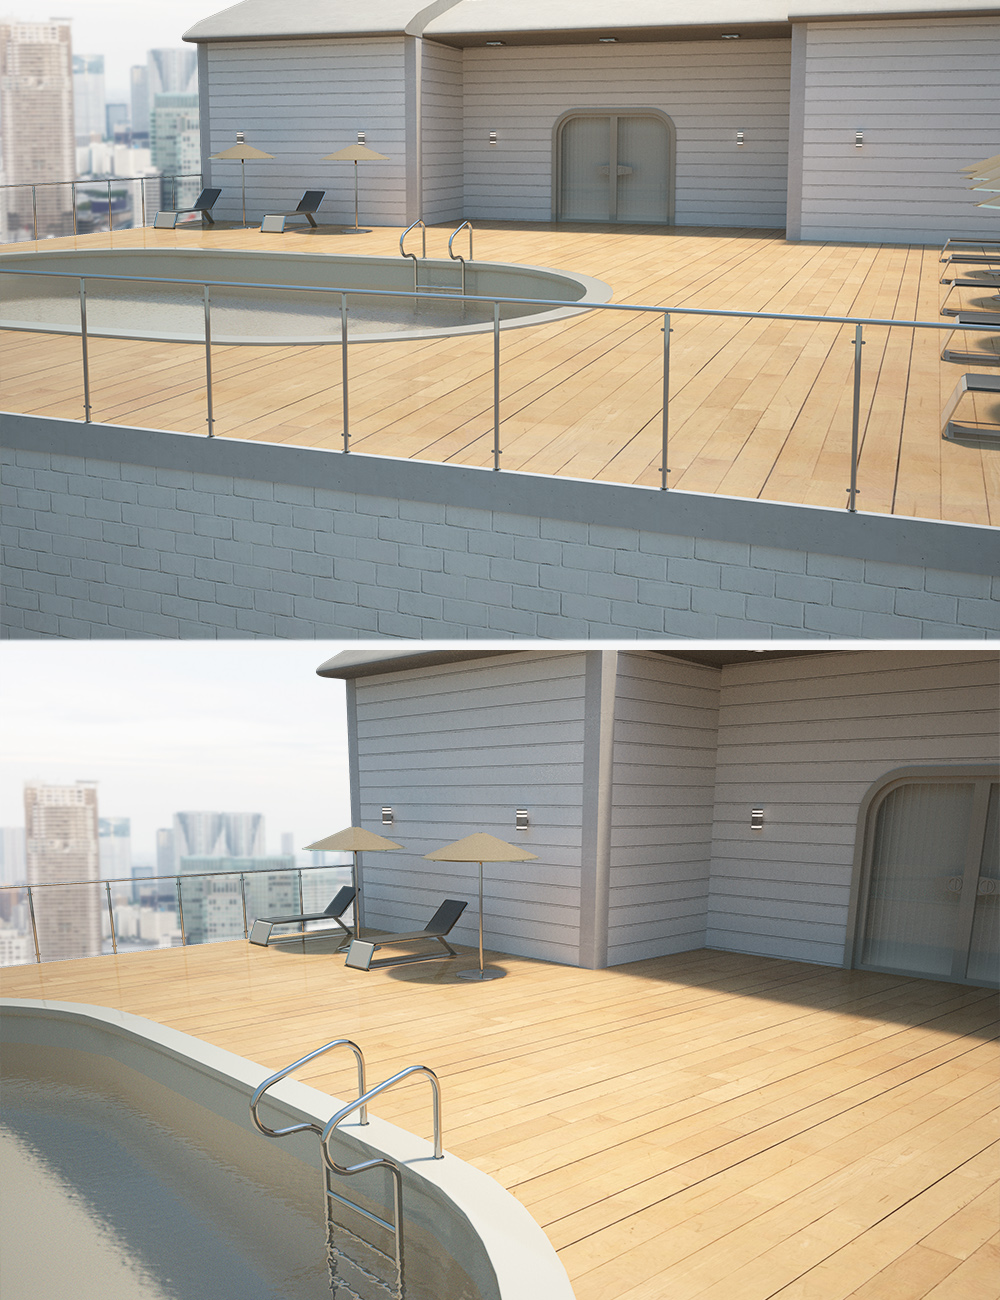 Utopia Balcony with Pool by: , 3D Models by Daz 3D